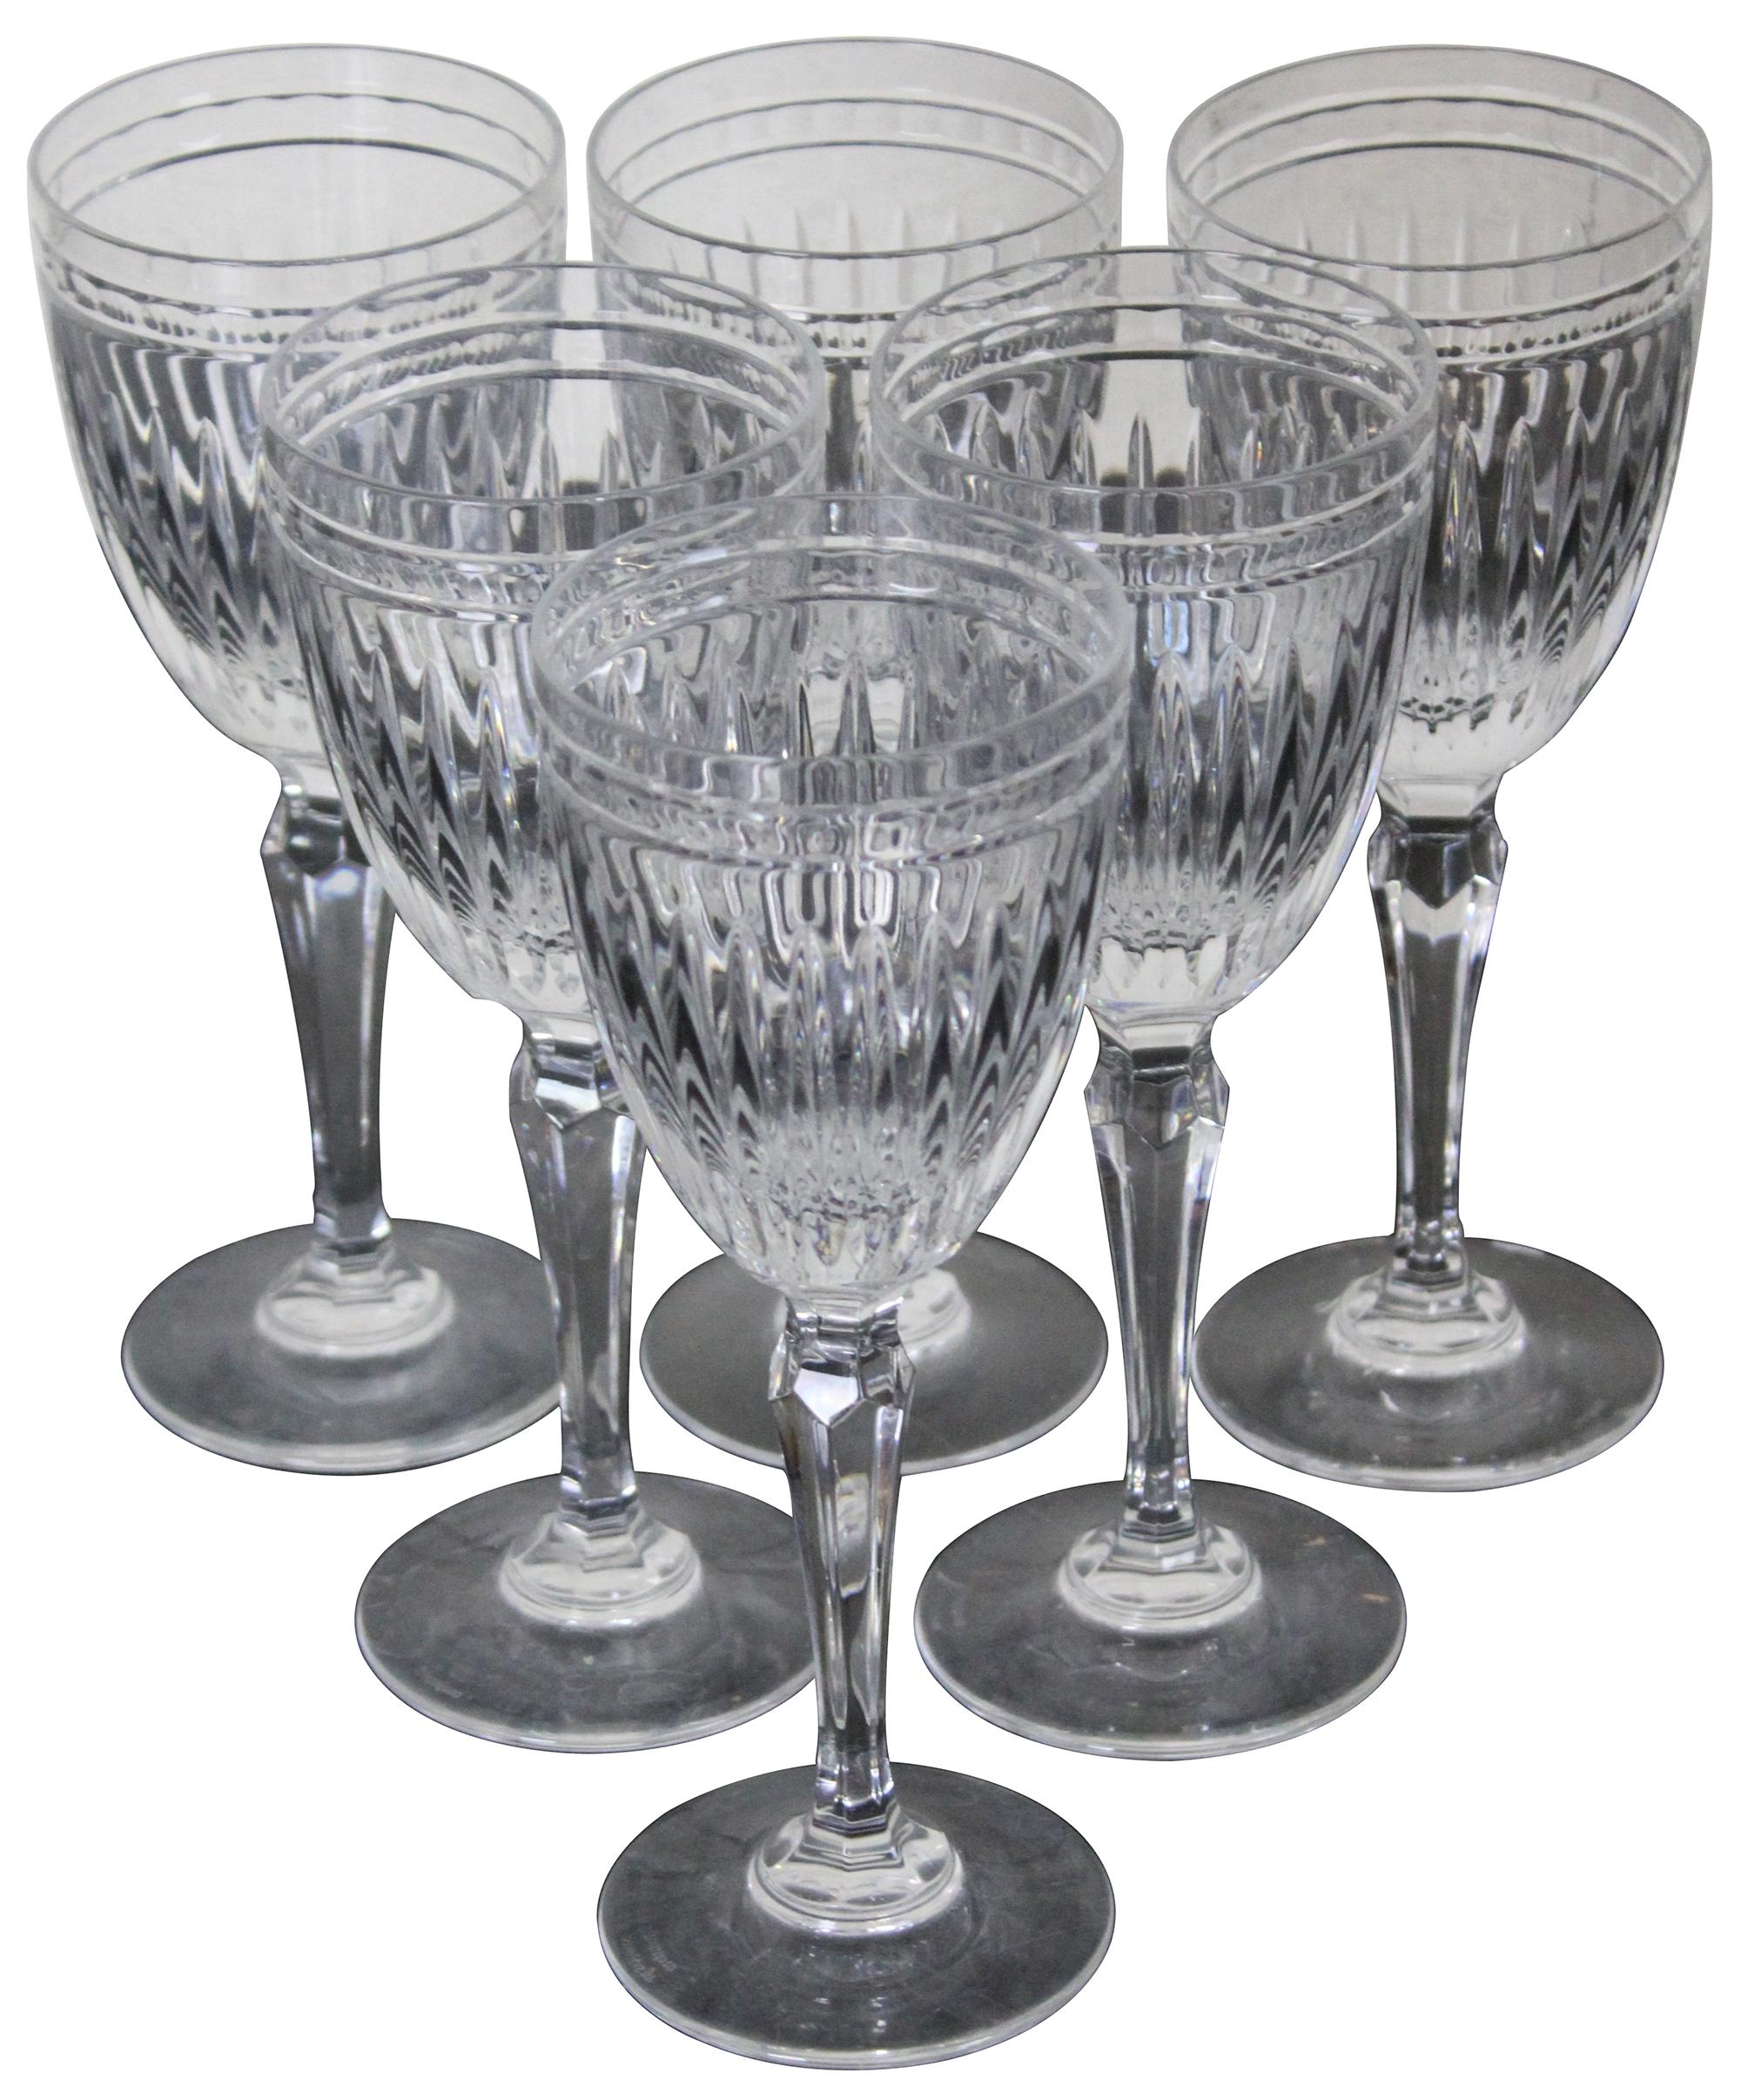 The Hanover pattern features a regular size cut stem with a smooth base (many Waterford pattern have a cut/etched design on the base) and a vertical cut paneled design with banding on the goblet portion. Measures: 8